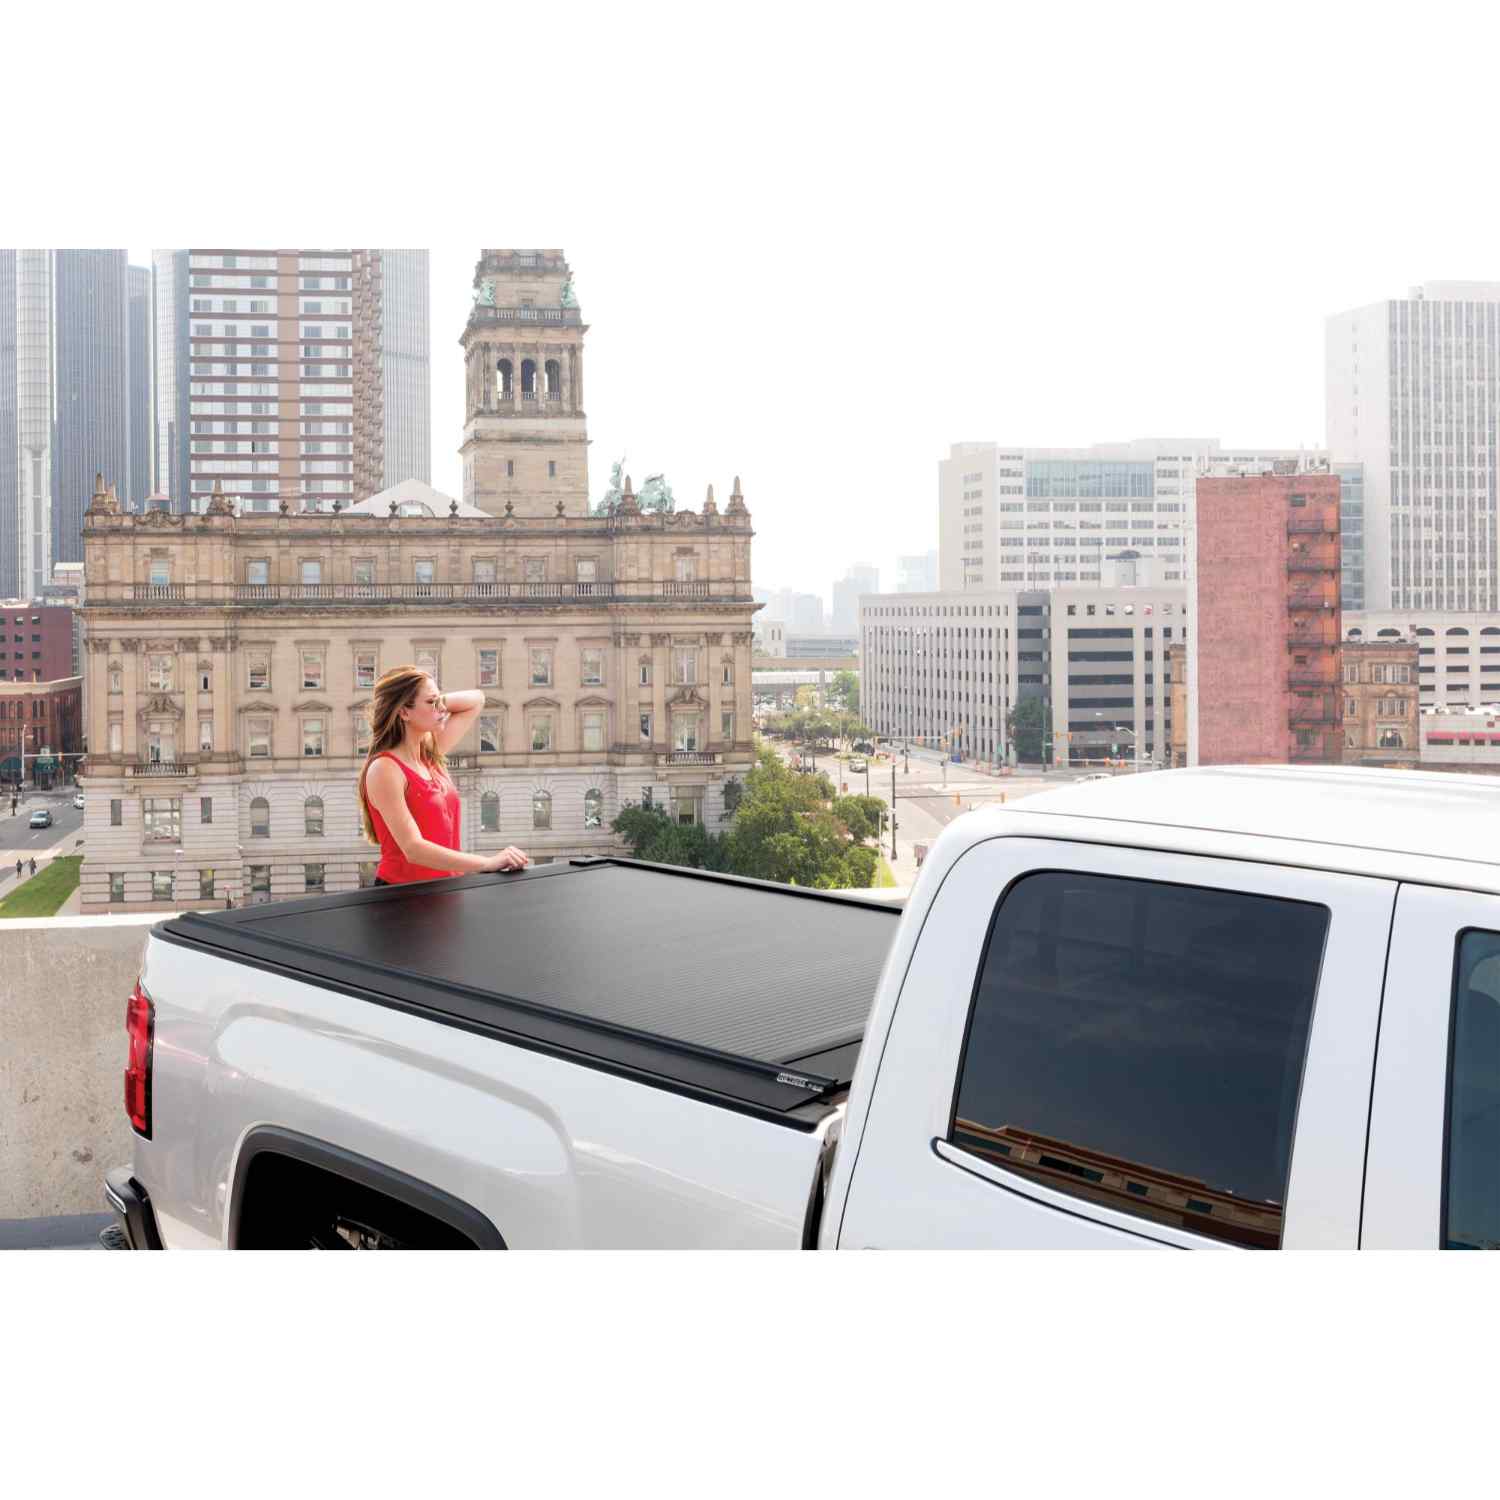 RetraxPRO MX Ram 1500 with RamBox (5.7ft. Bed) Retractable Tonneau Cover